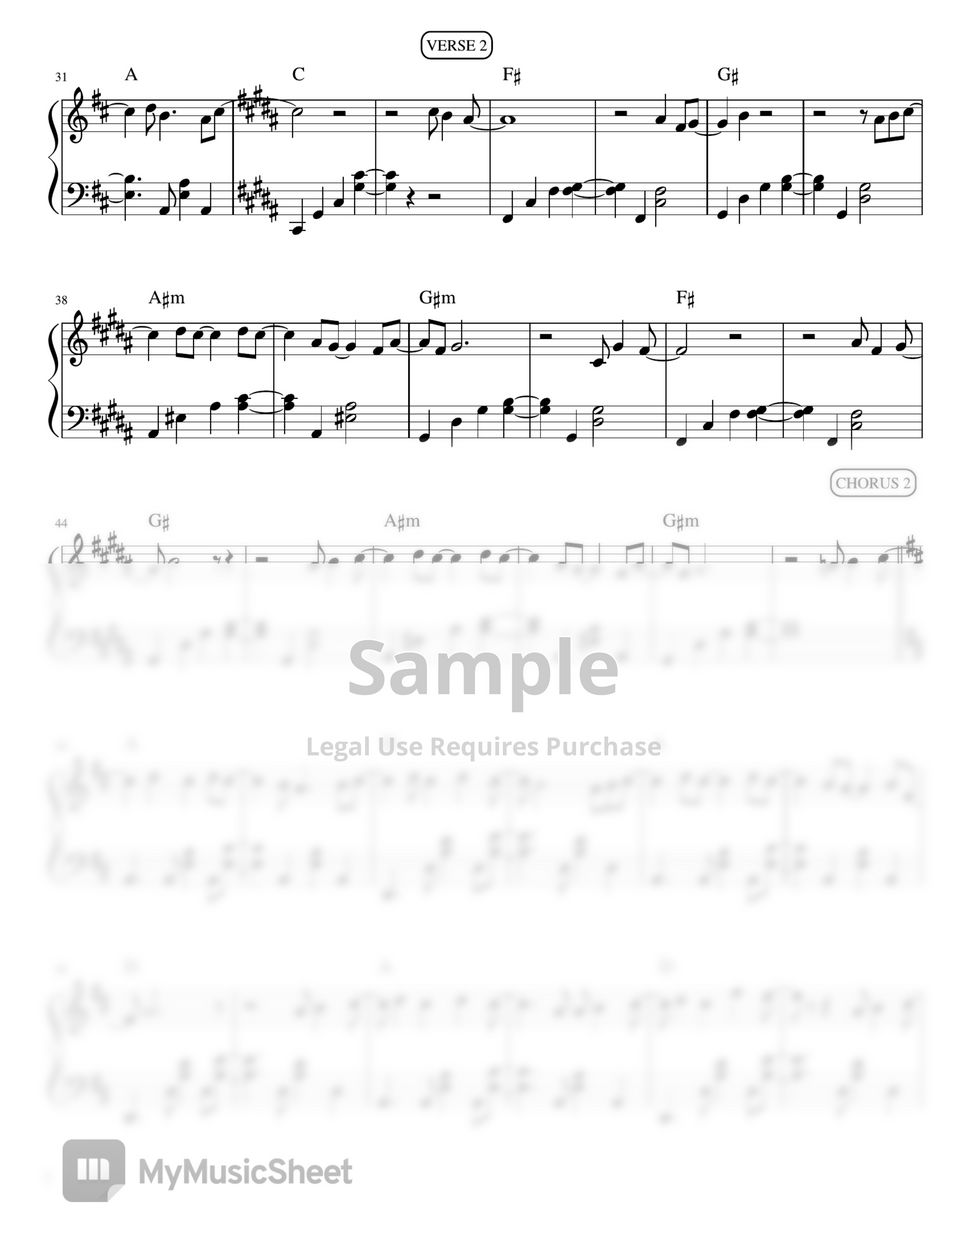 Eraserheads - With A Smile (piano sheet music) by Mel's Music Corner